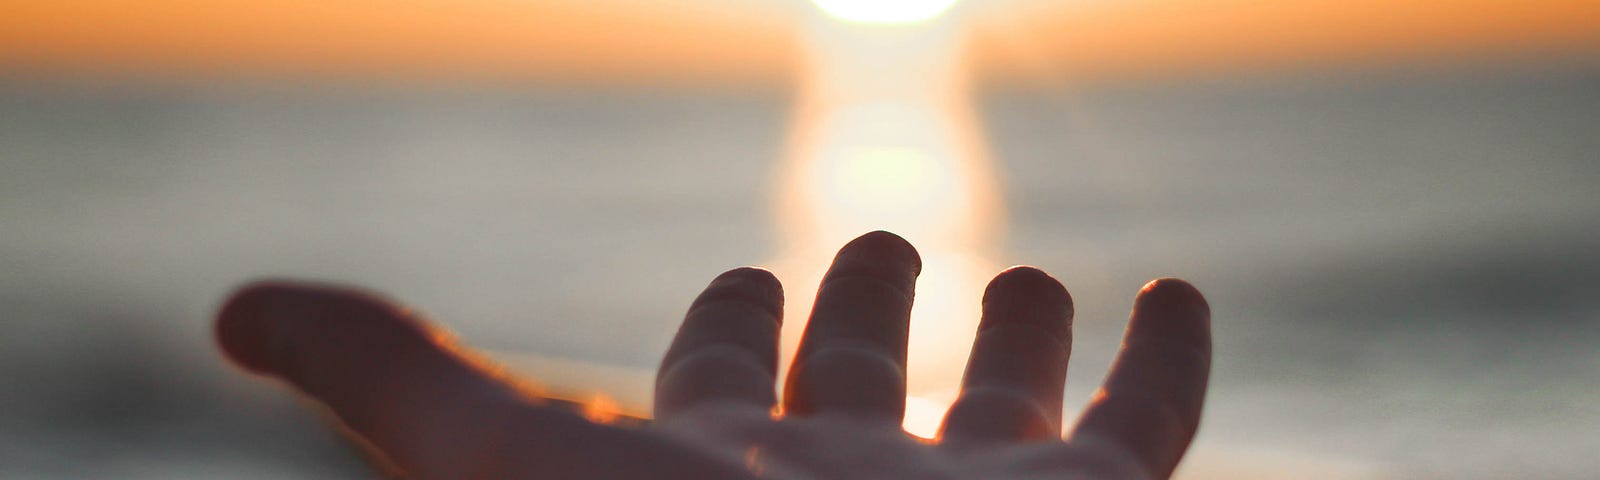 Outstretched hand at the beach at sunset, reaching toward the setting sun.